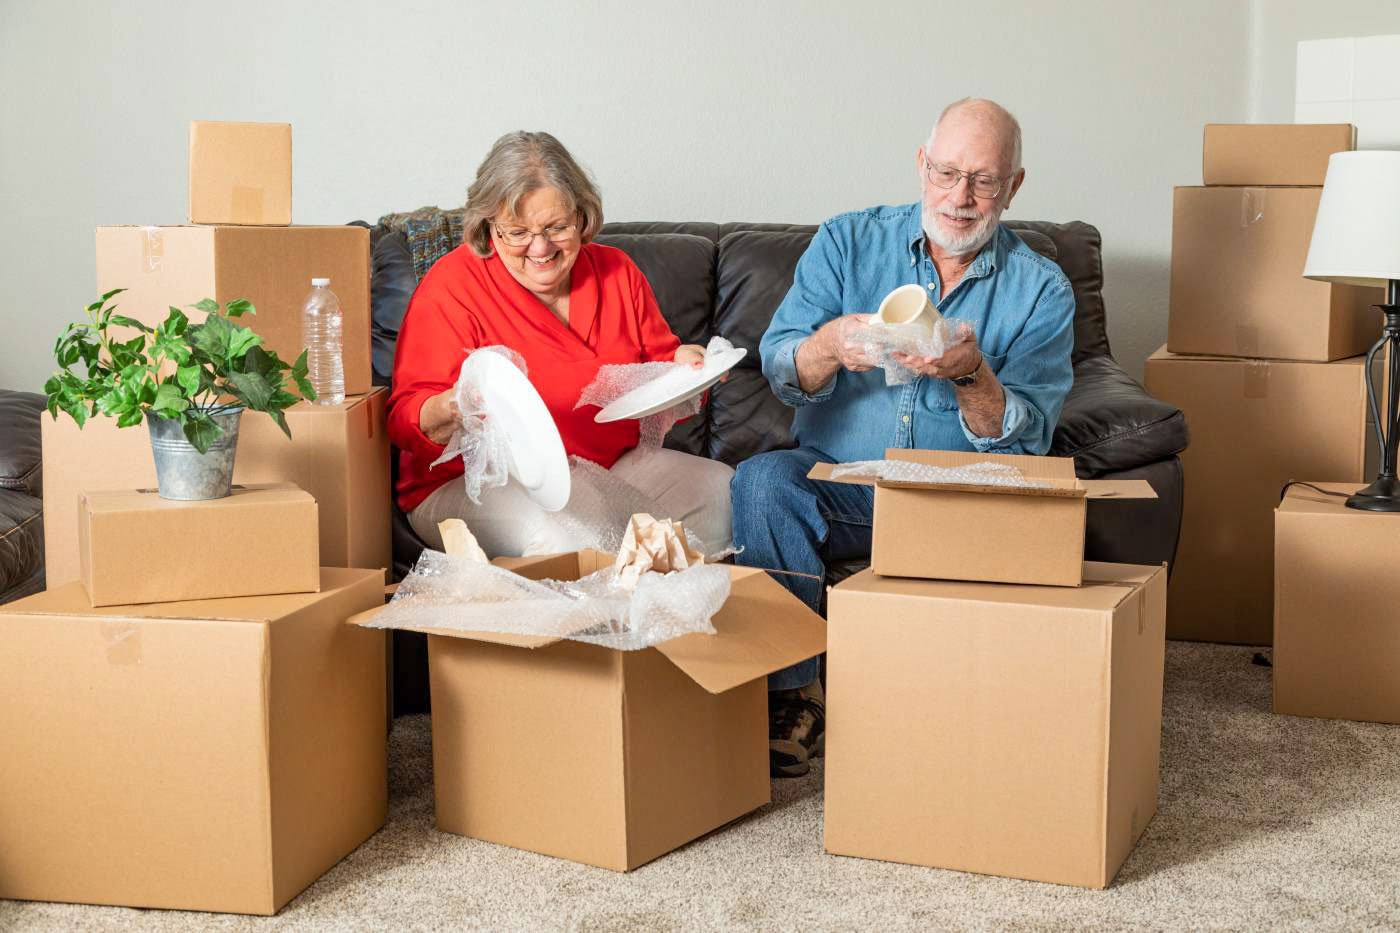 an elderly couple packs cardboard boxes -Tips and Options to Consider When Helping Aging Parents Downsize Their Home or Furnishings